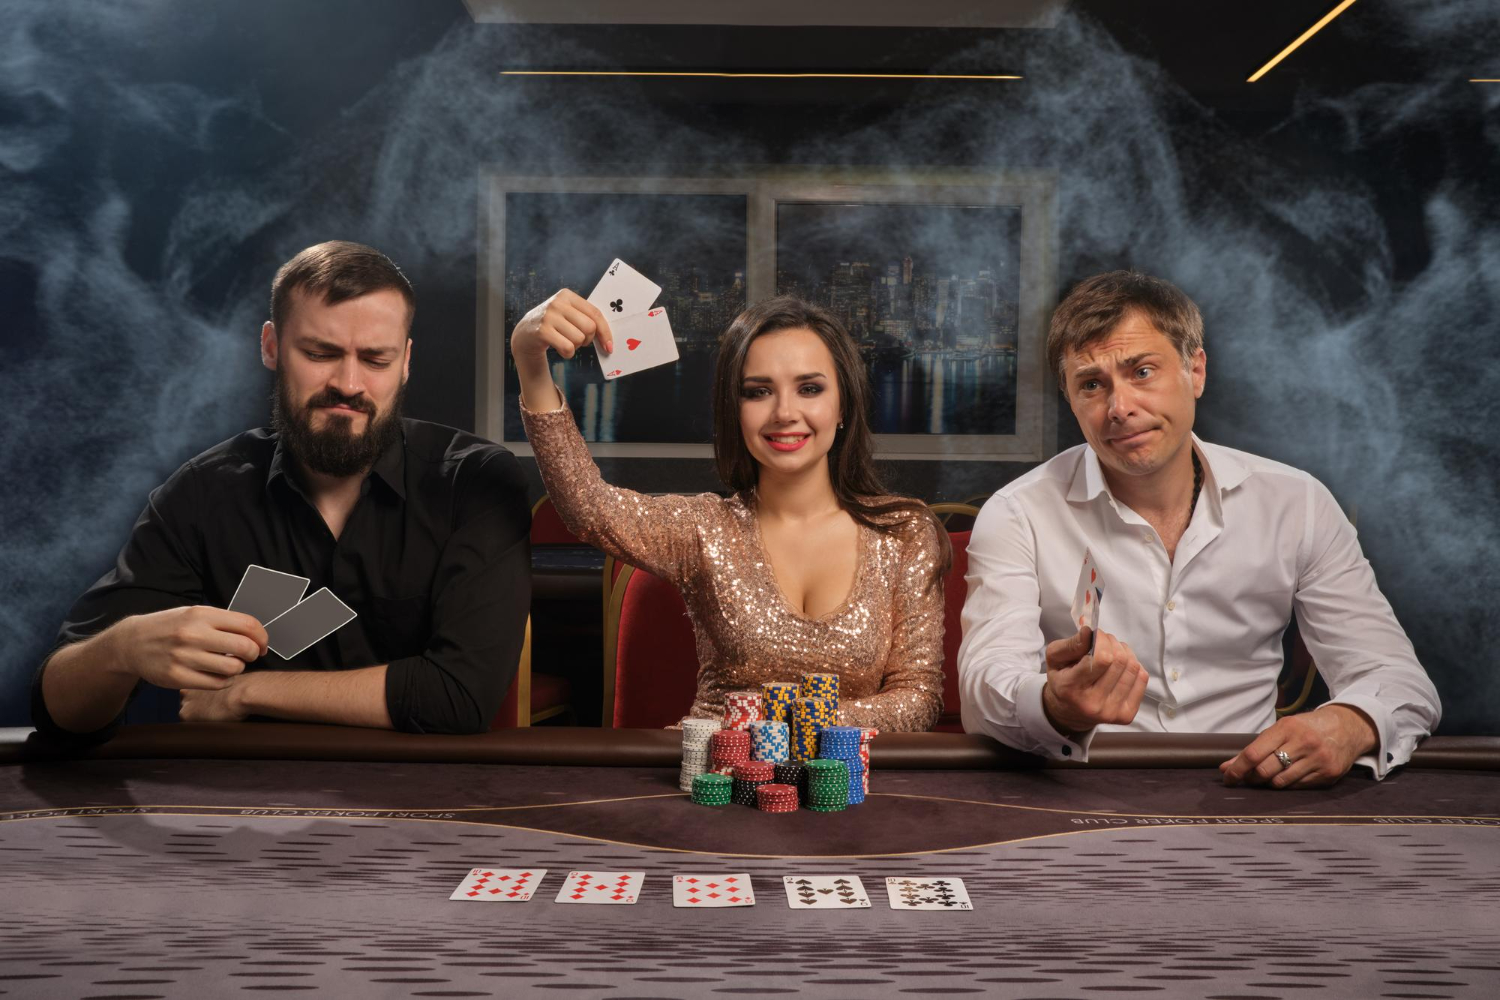 cheerful-friends-are-playing-poker-casino-smoke-girl-has-won-showing-her-cards-men-had-lost-youth-are-making-bets-waiting-huge-win-gambling-money-games-fortune